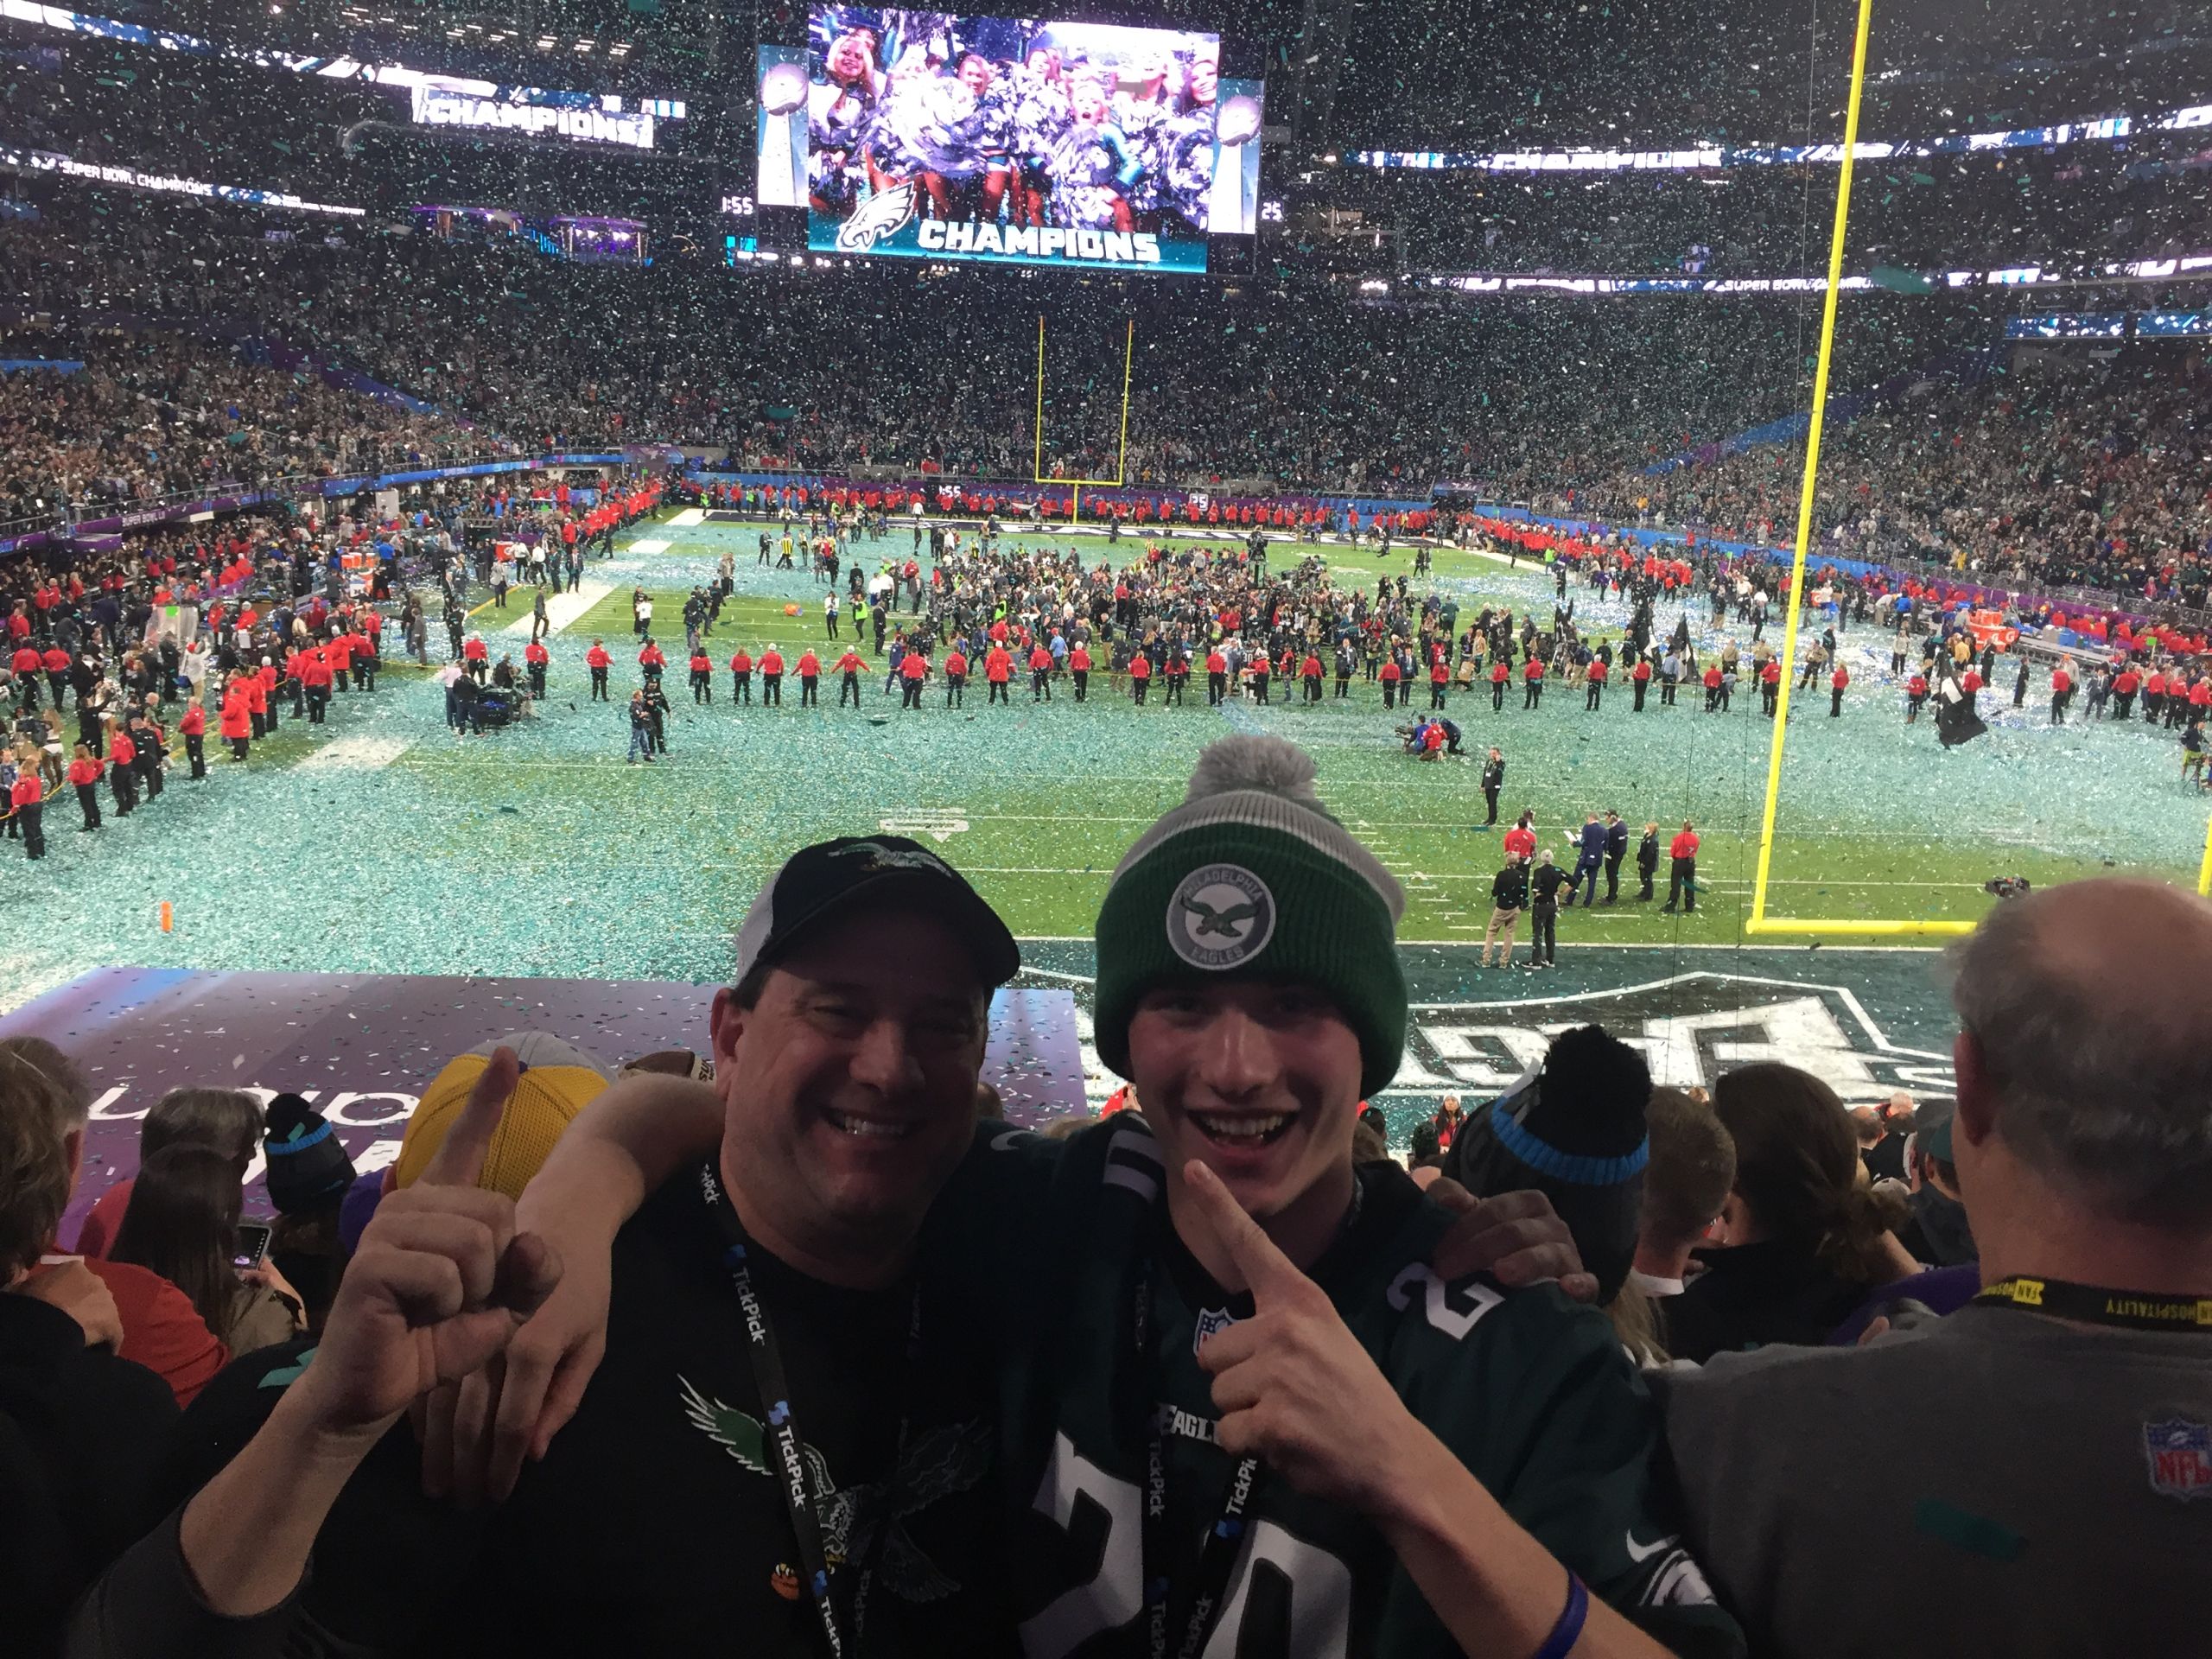 Senior communications major, John Rader, and his father, celebrate the victory. Photo from John Rader.